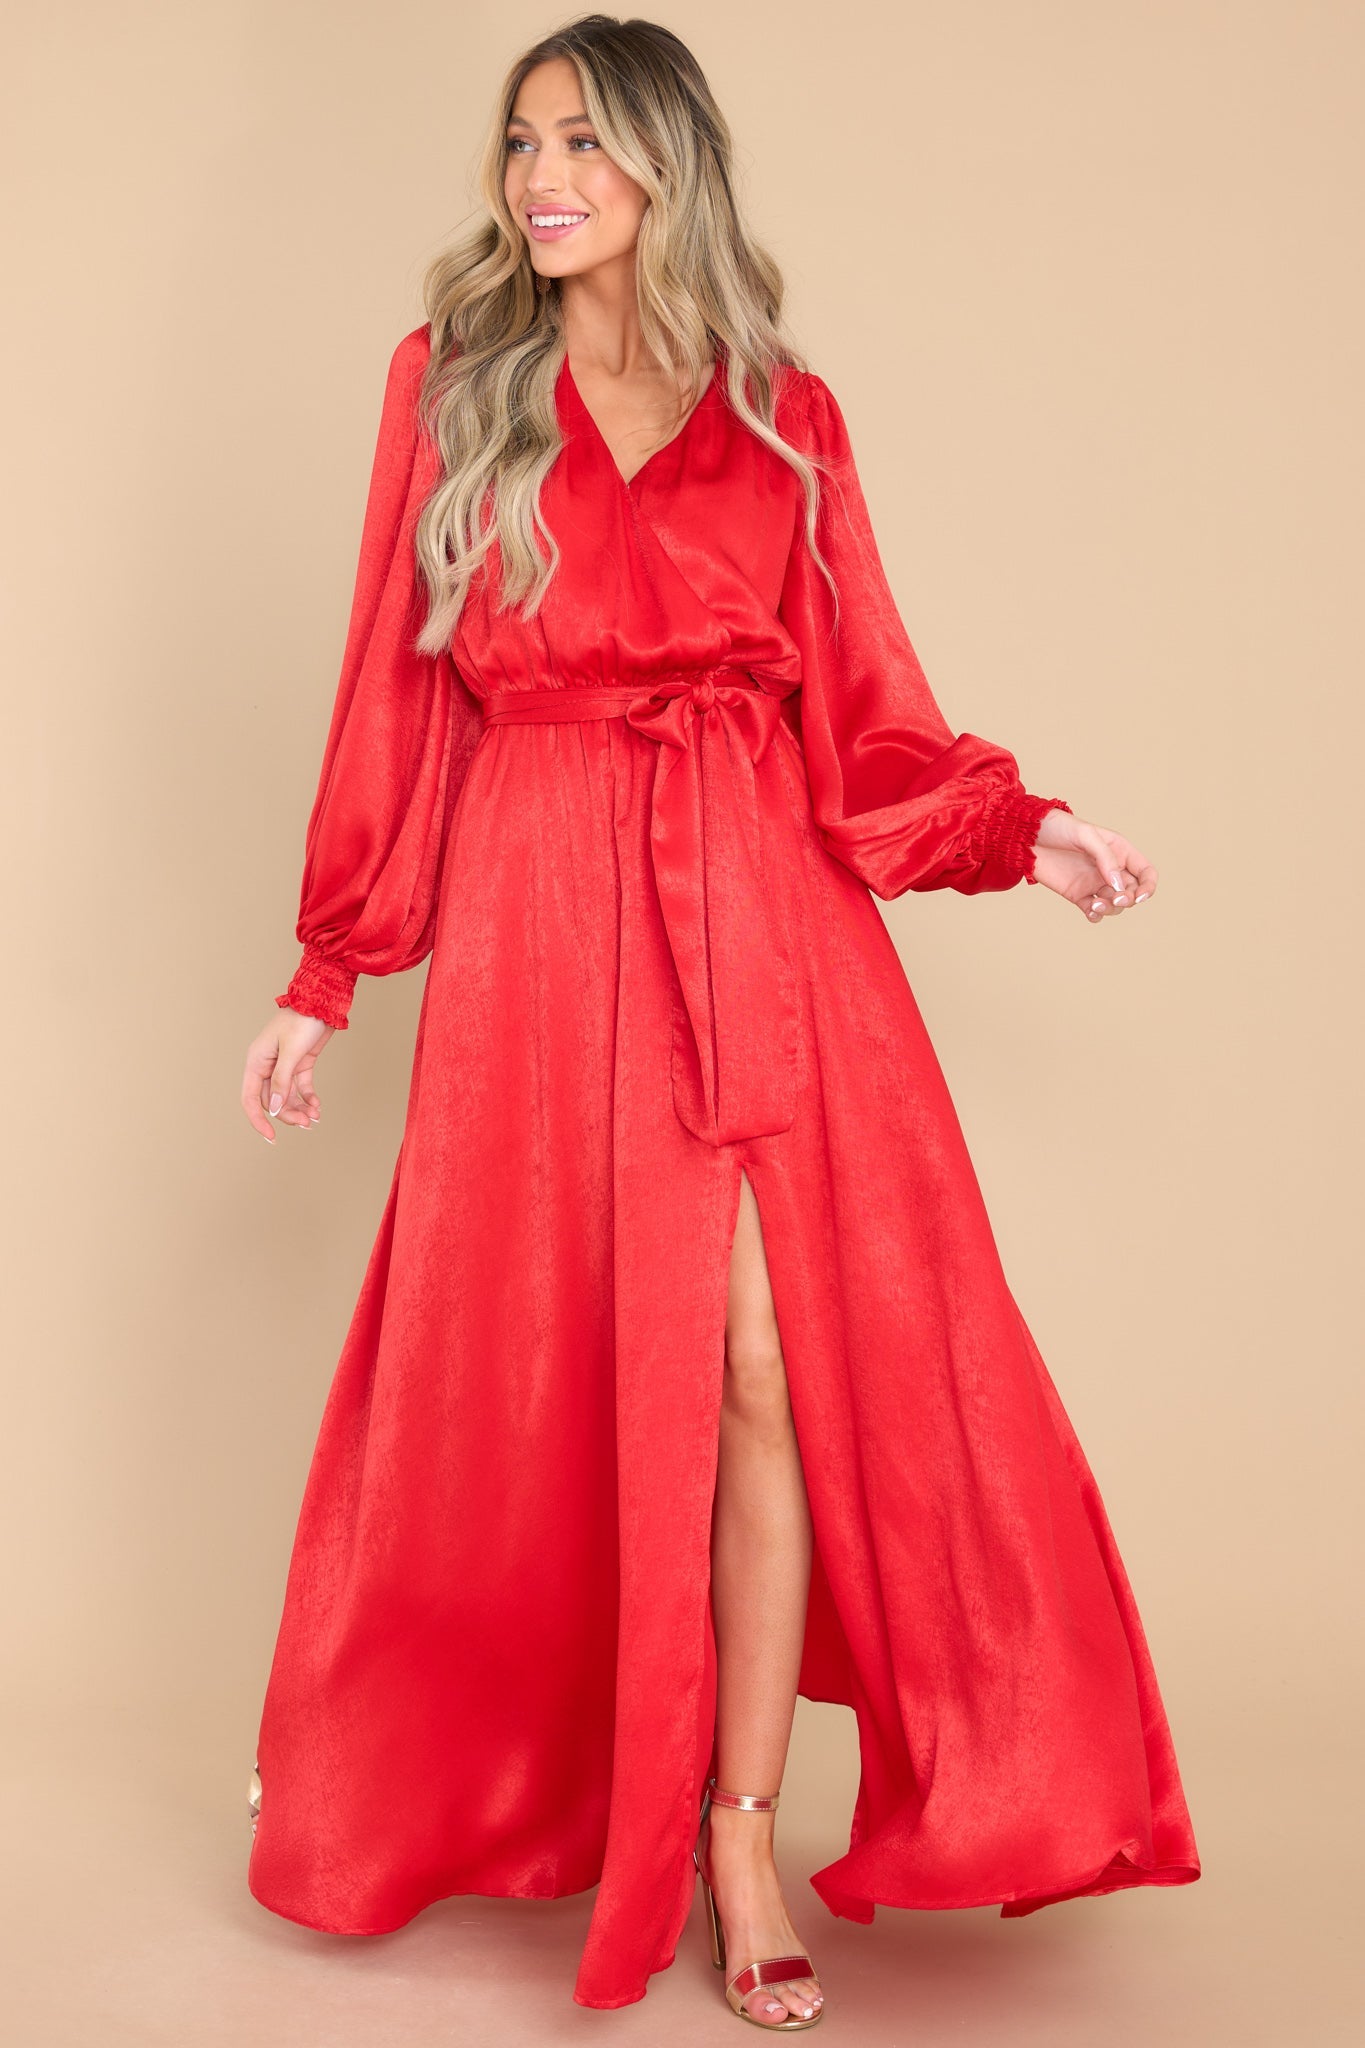 Cecelia Dress - Red maxi dress with frill detail